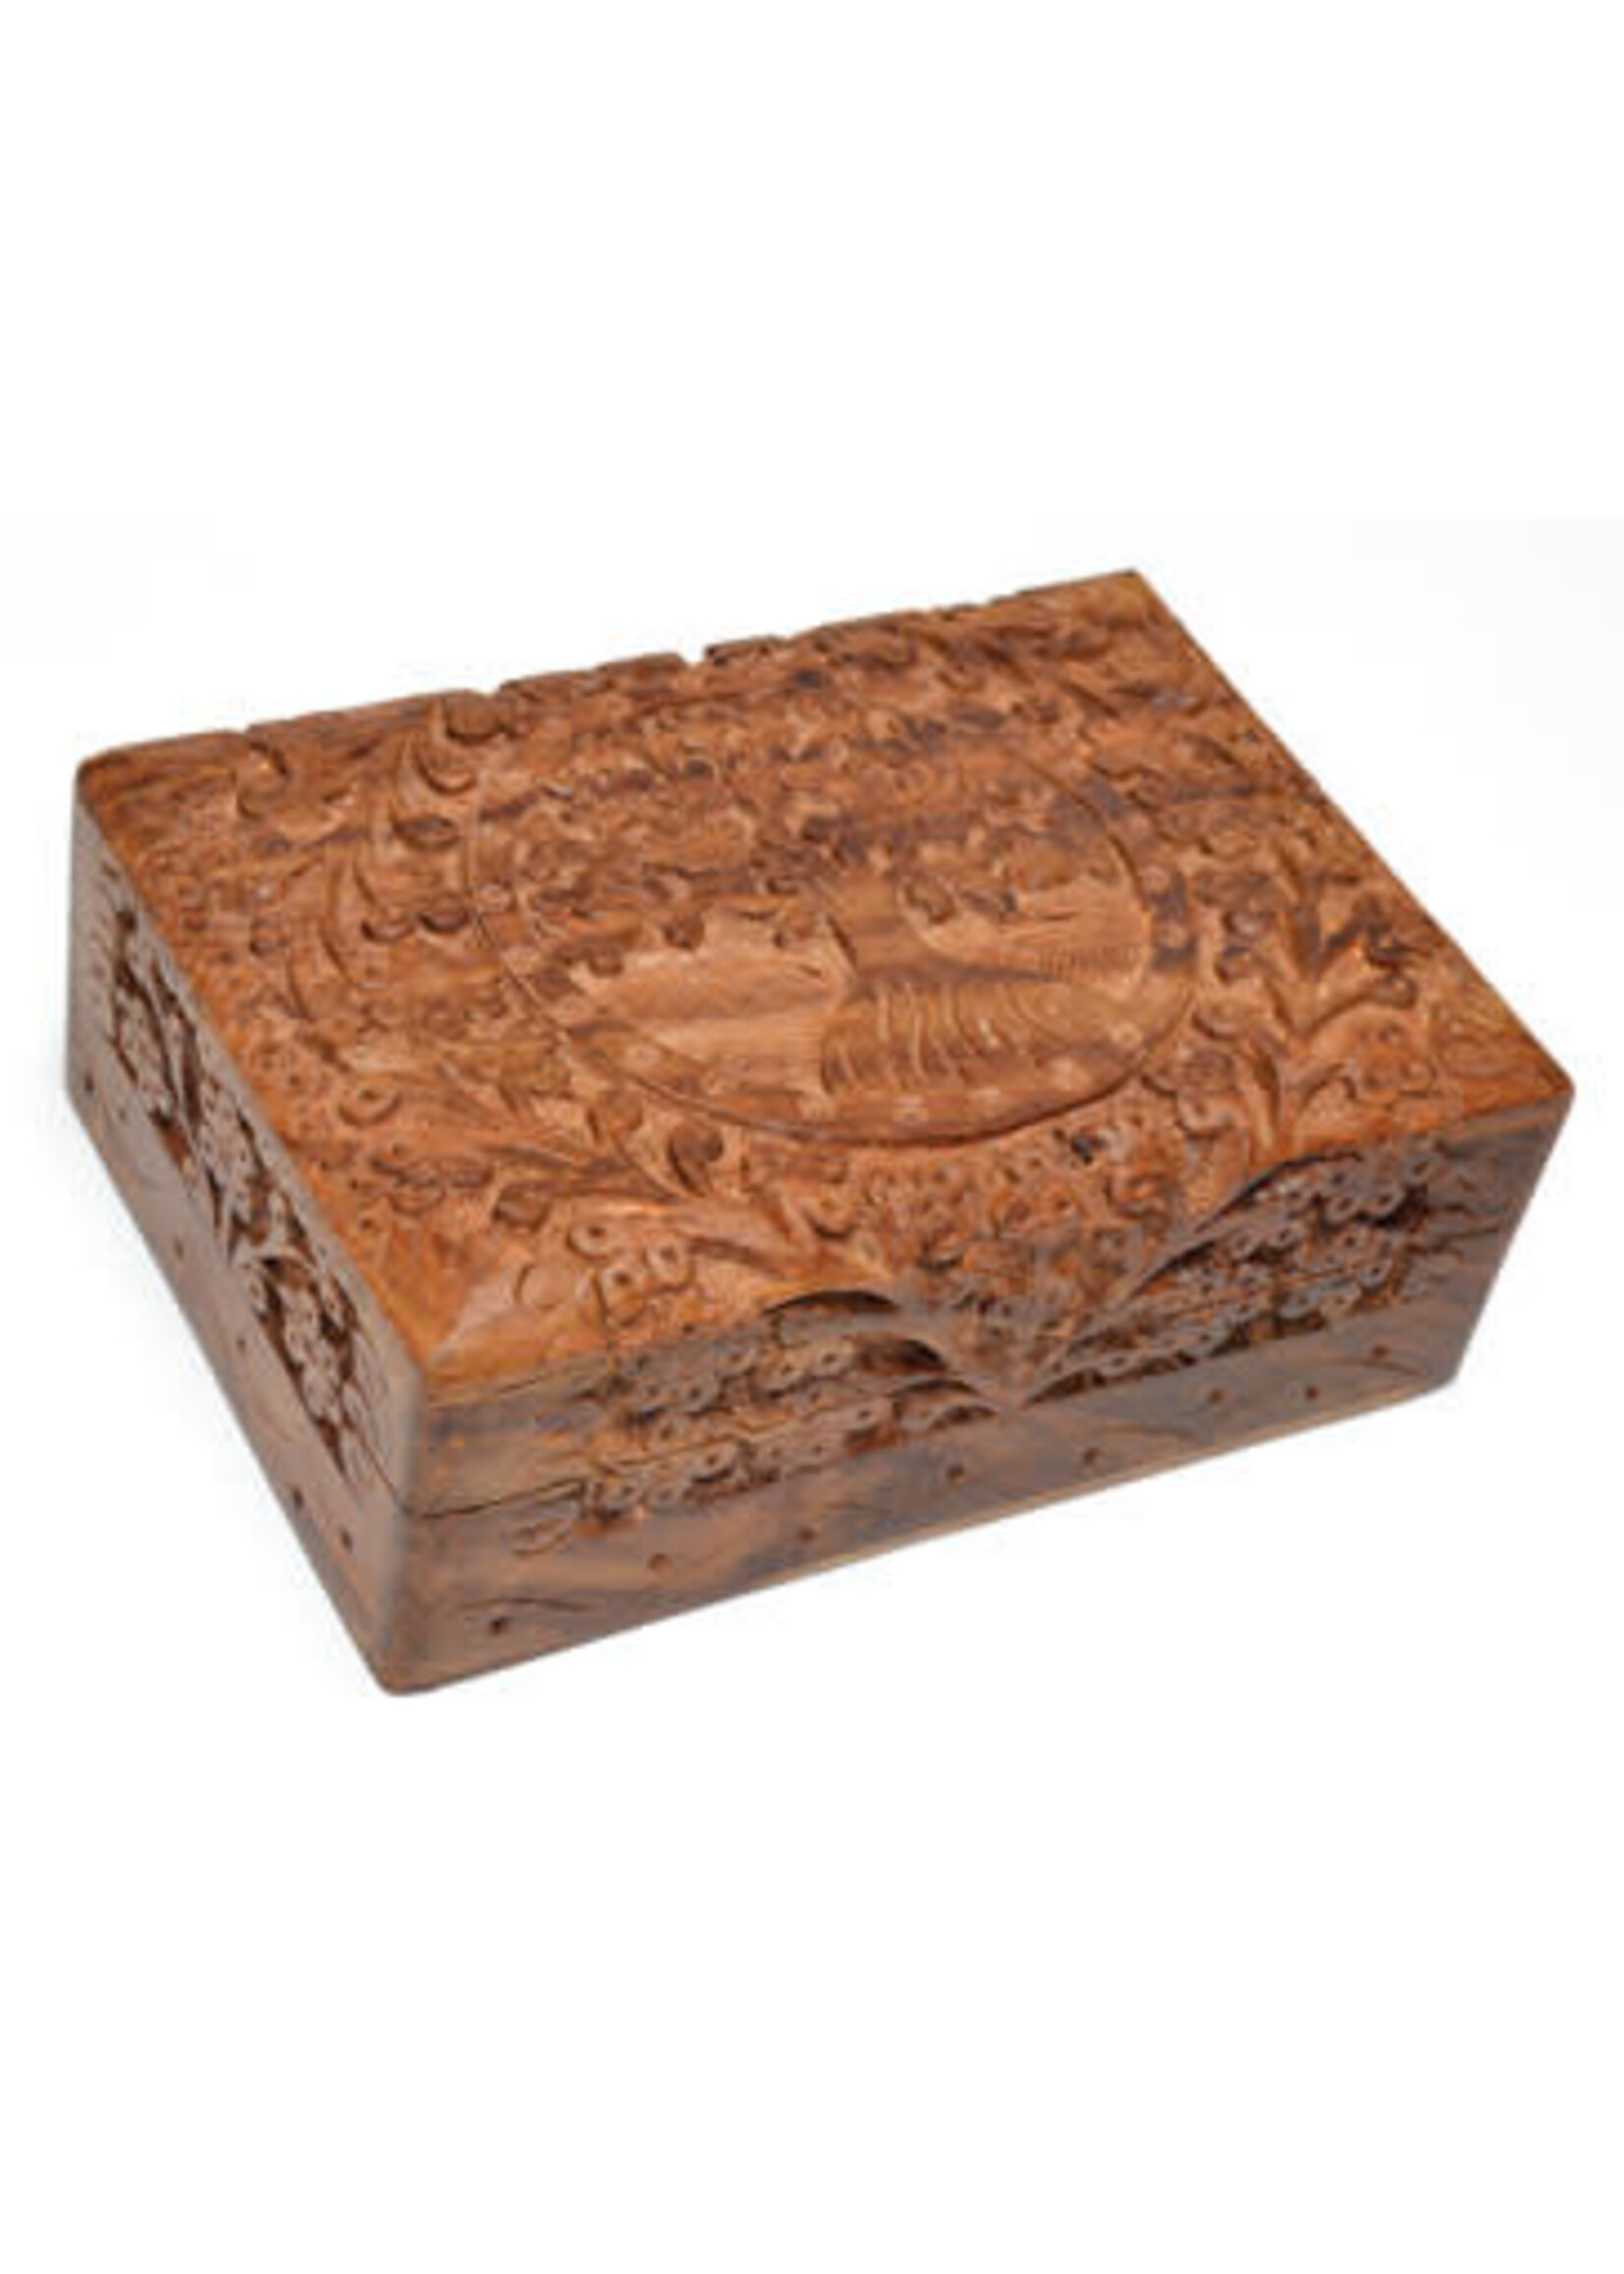 Tree of Life Carved Wooden Box - 4" x 6"